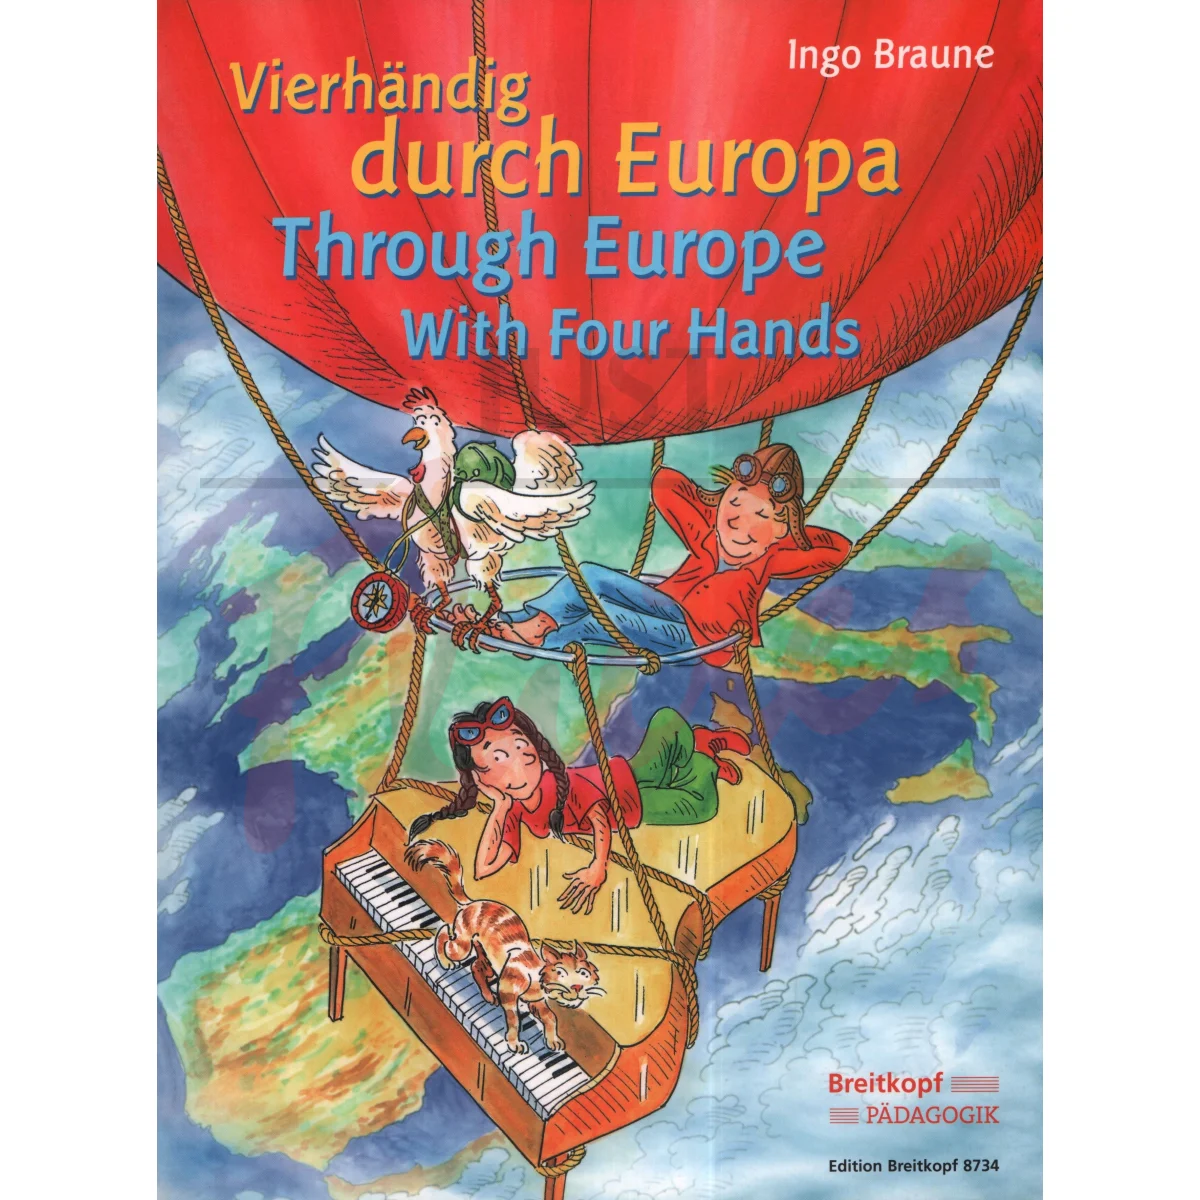 Through Europe With Four Hands